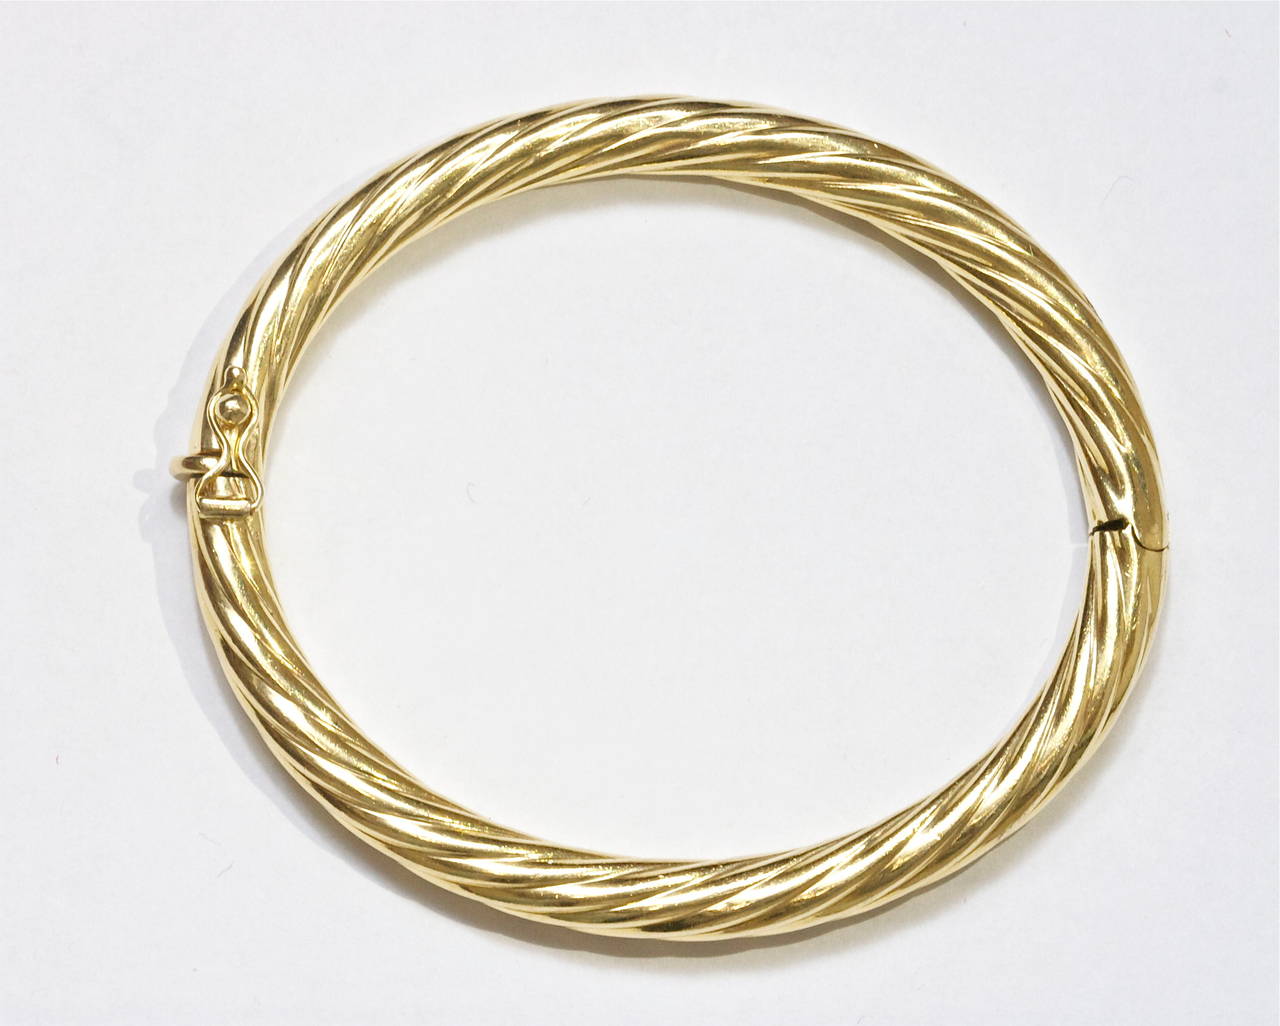 A finely made rope motif bangle bracelet crafted in some of the finest 18k gold Italy is historically known for. 

Stamped T & Co. Italy and weighs 17.84 grams.